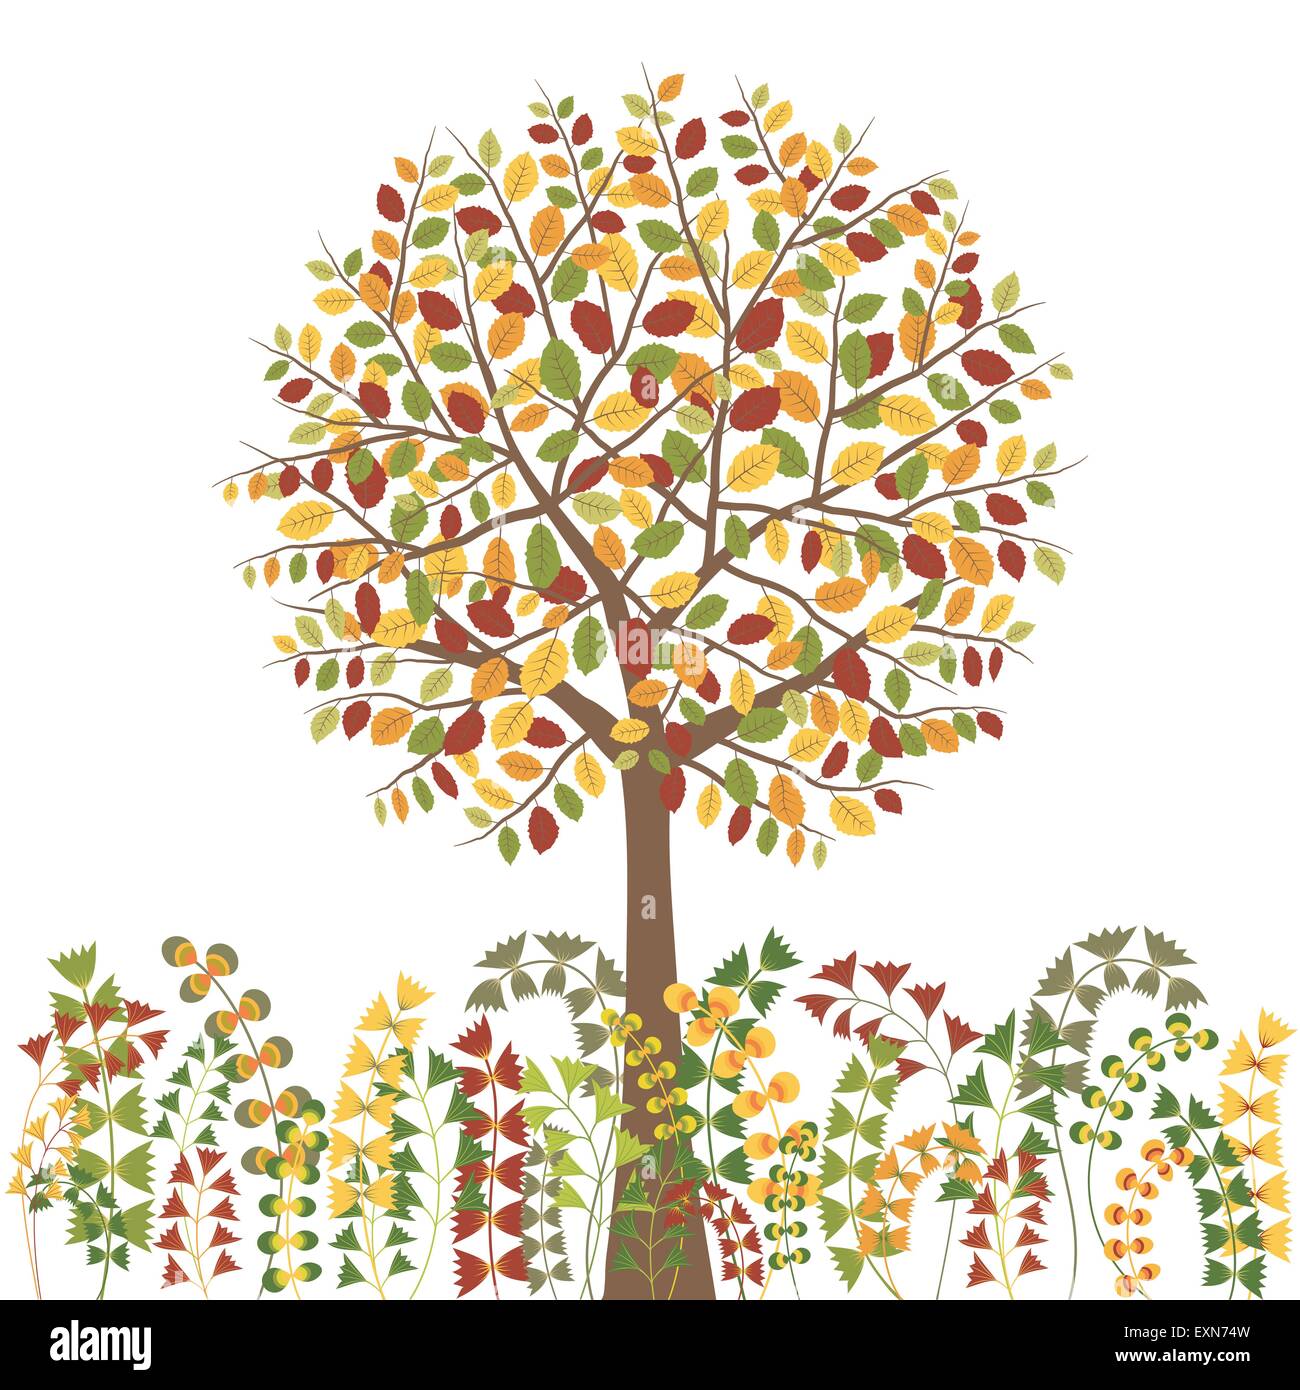 Colorful Autumn Tree and Herb Background Stock Vector